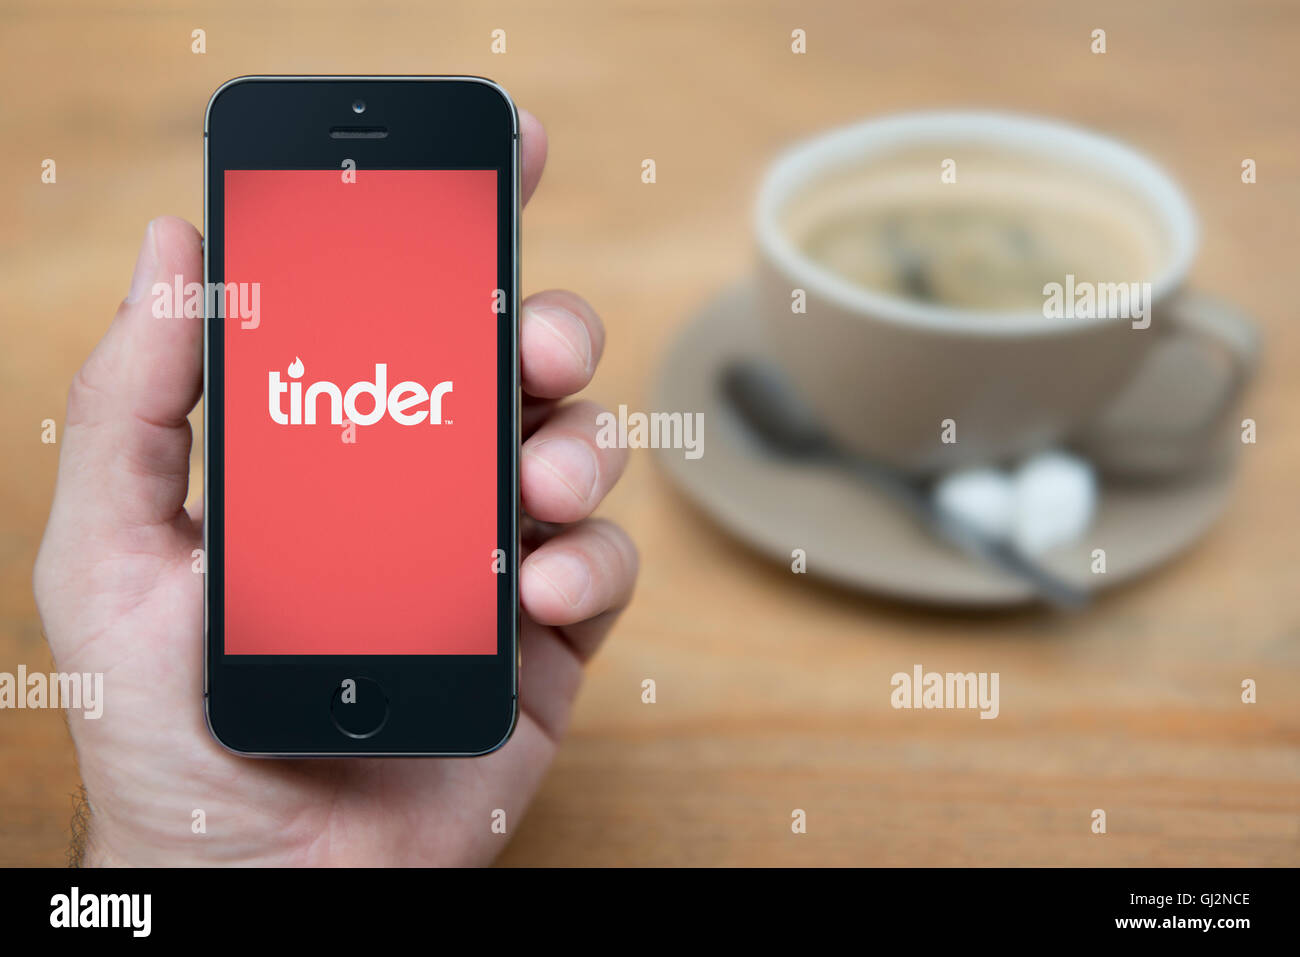 A man looks at his iPhone which displays the Tinder logo, while sat with a cup of coffee (Editorial use only). Stock Photo